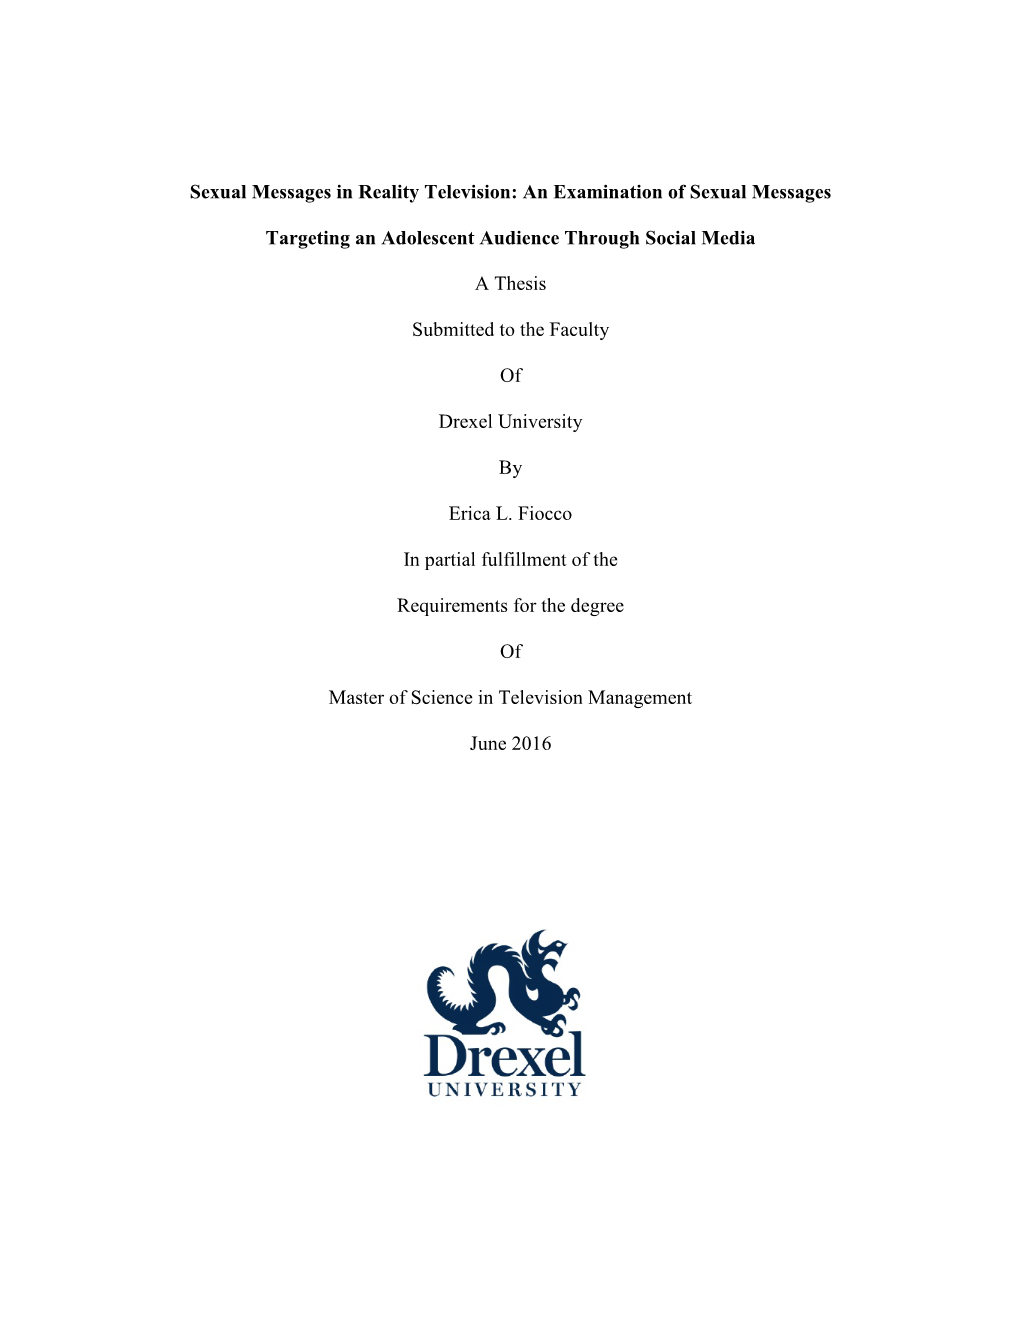 Sexual Messages in Reality Television: an Examination of Sexual Messages